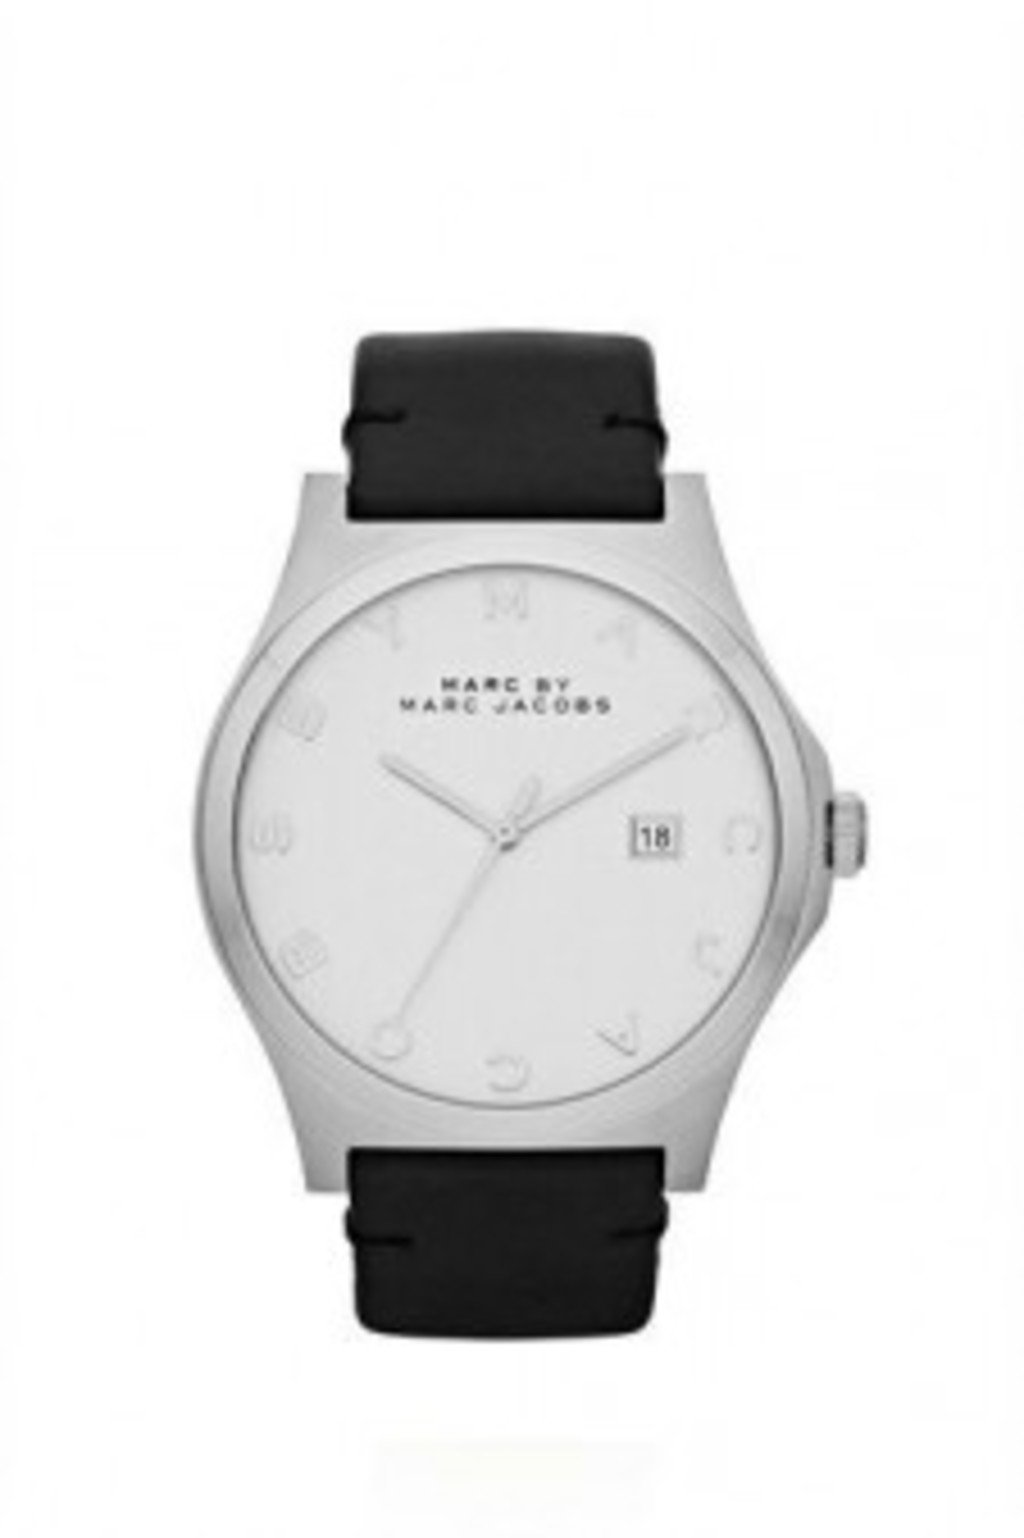 Marc Jacobs Henry Watch, Source: weheartit.com